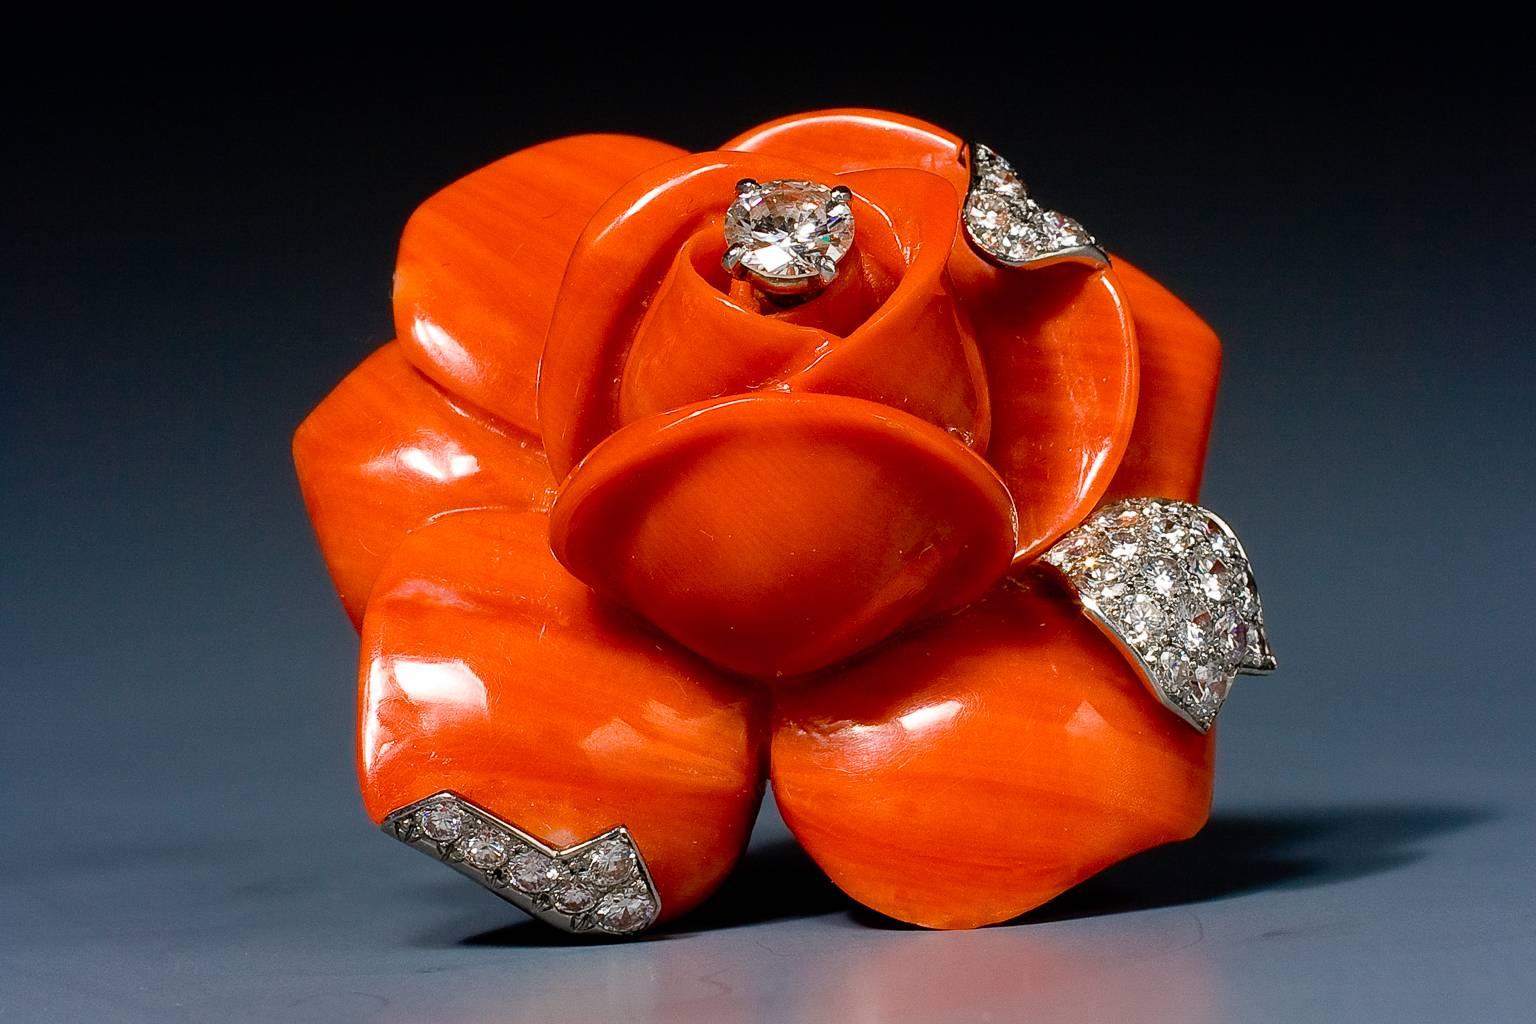 A striking coral and diamond flower brooch by Cartier, depicting a carved coral rose, the petals with brilliant cut diamond details and brilliant cut diamond dew drop, mounted in platinum and 18 karat gold.
In original fitted Cartier